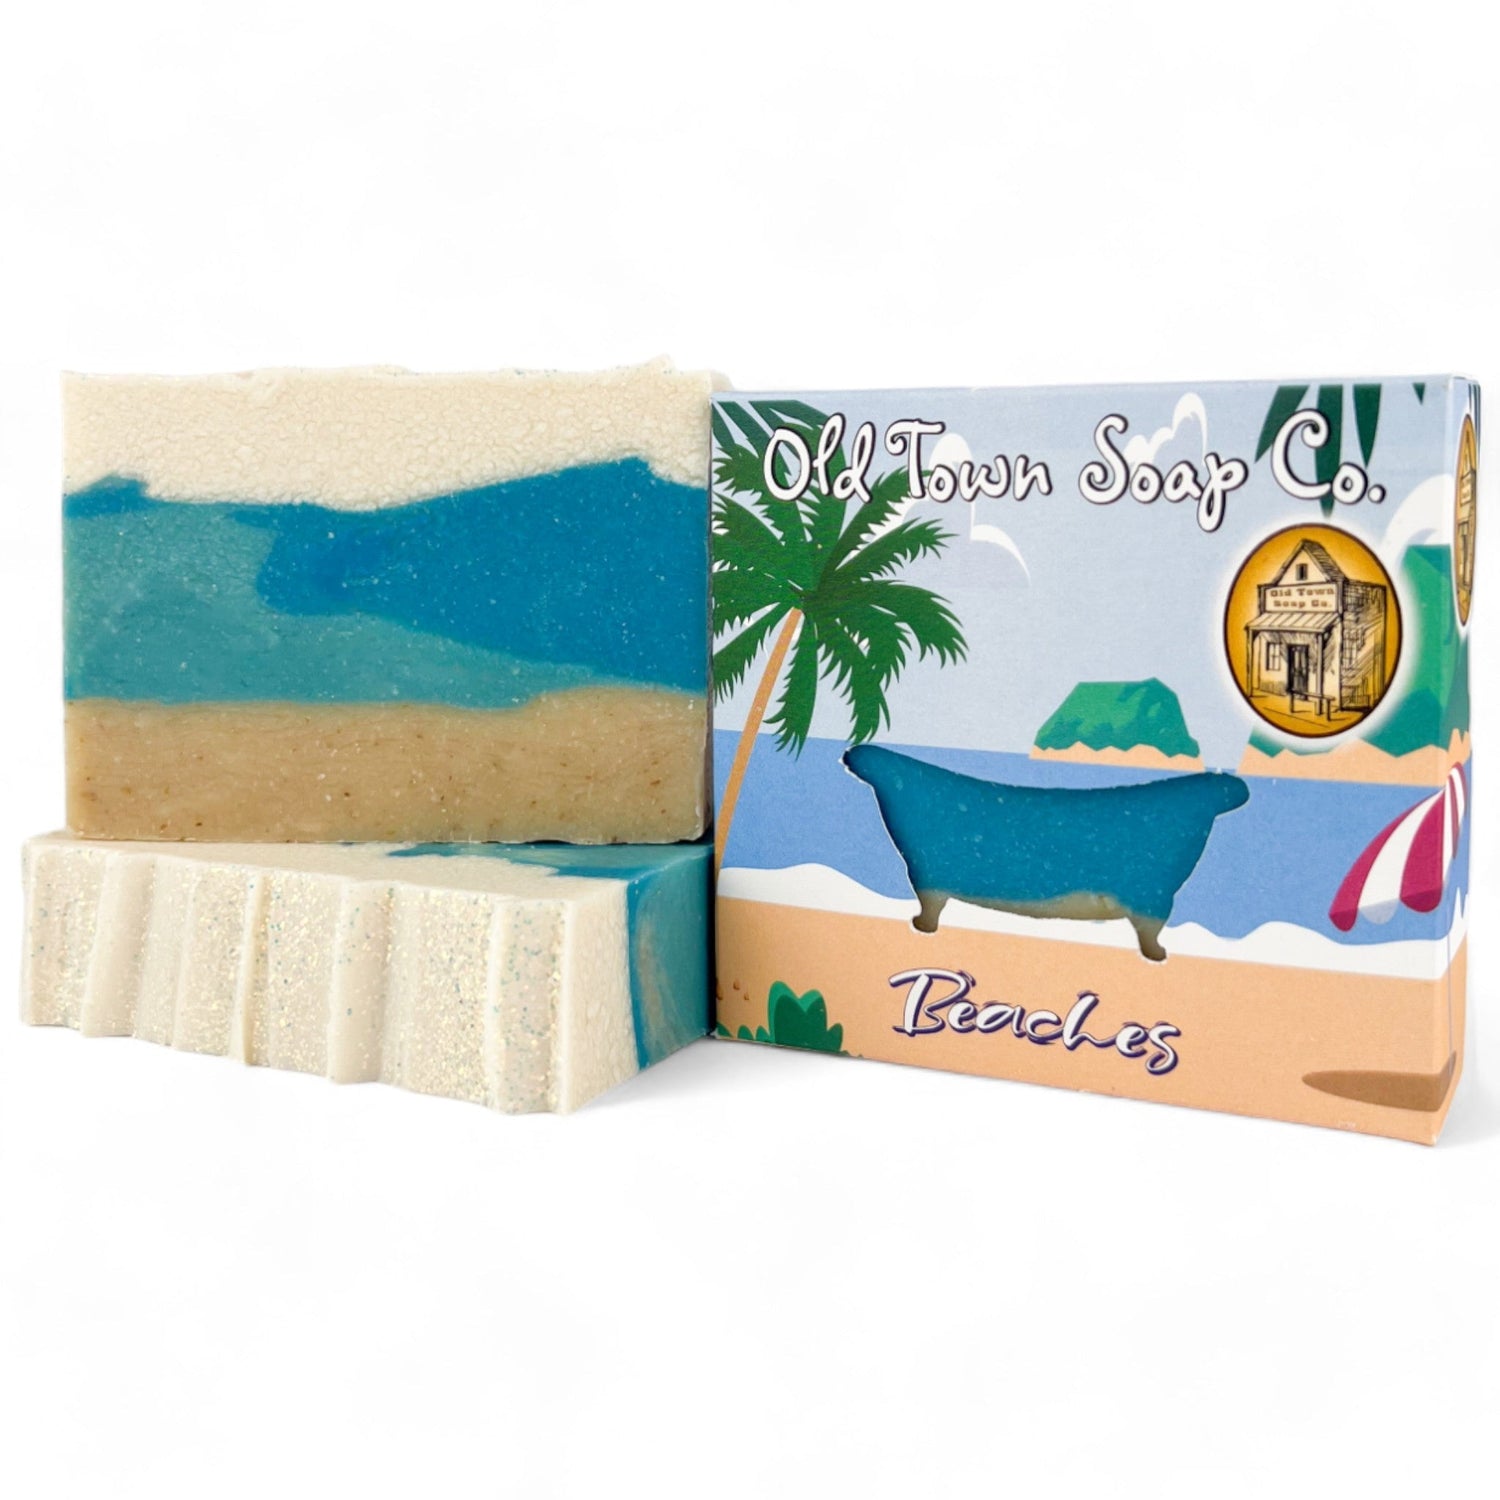 Beaches -Bar Soap - Old Town Soap Co.